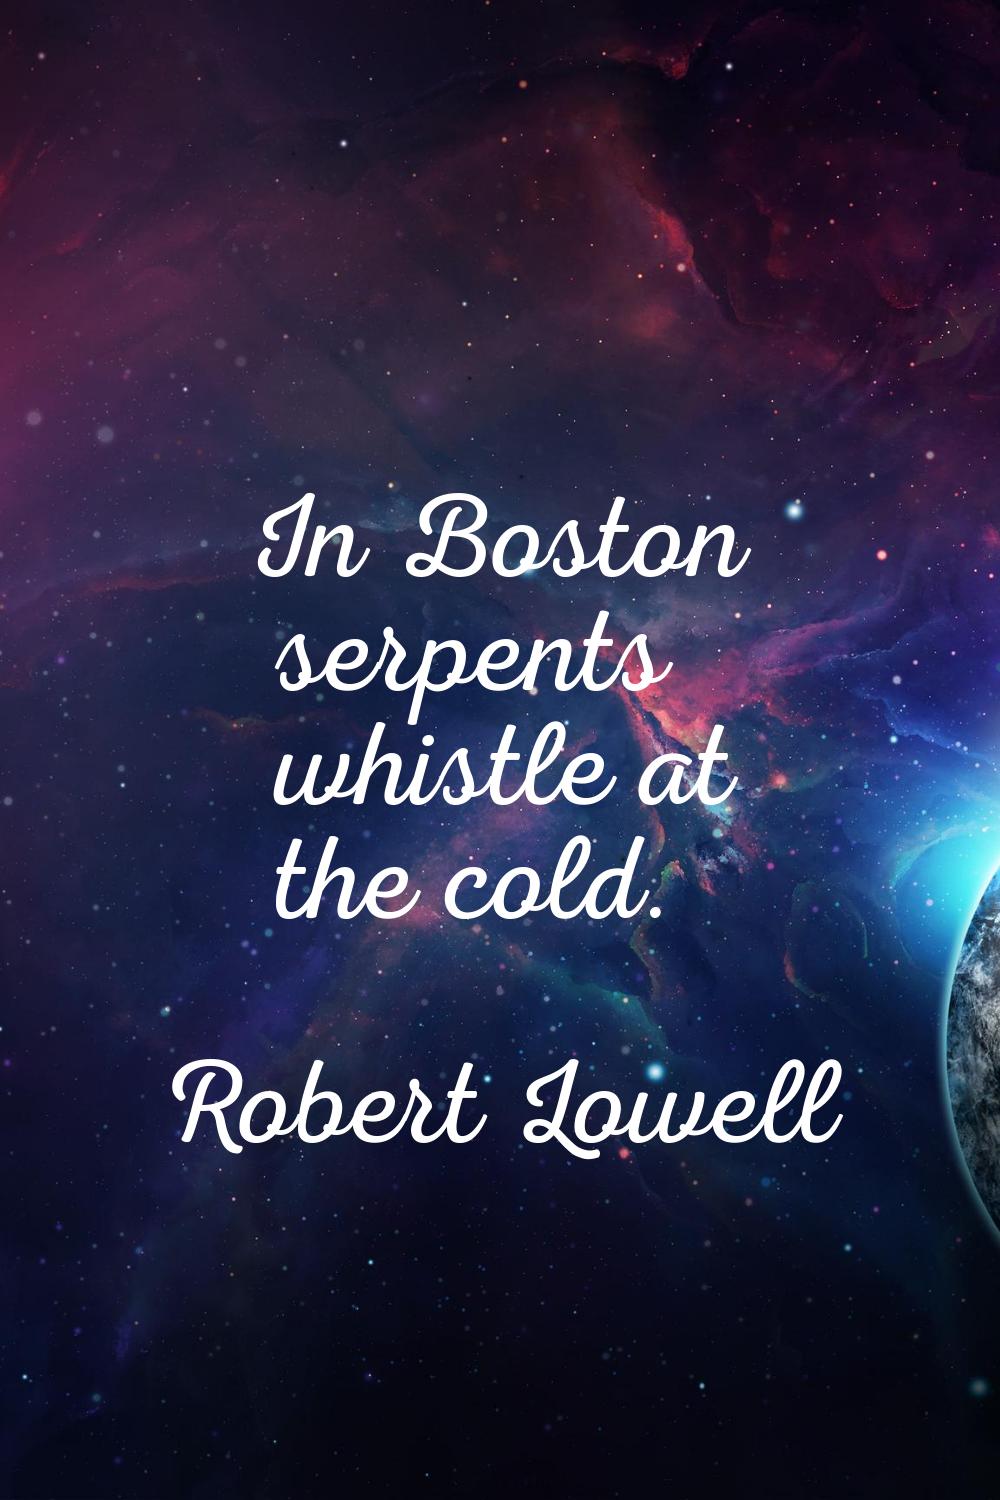 In Boston serpents whistle at the cold.